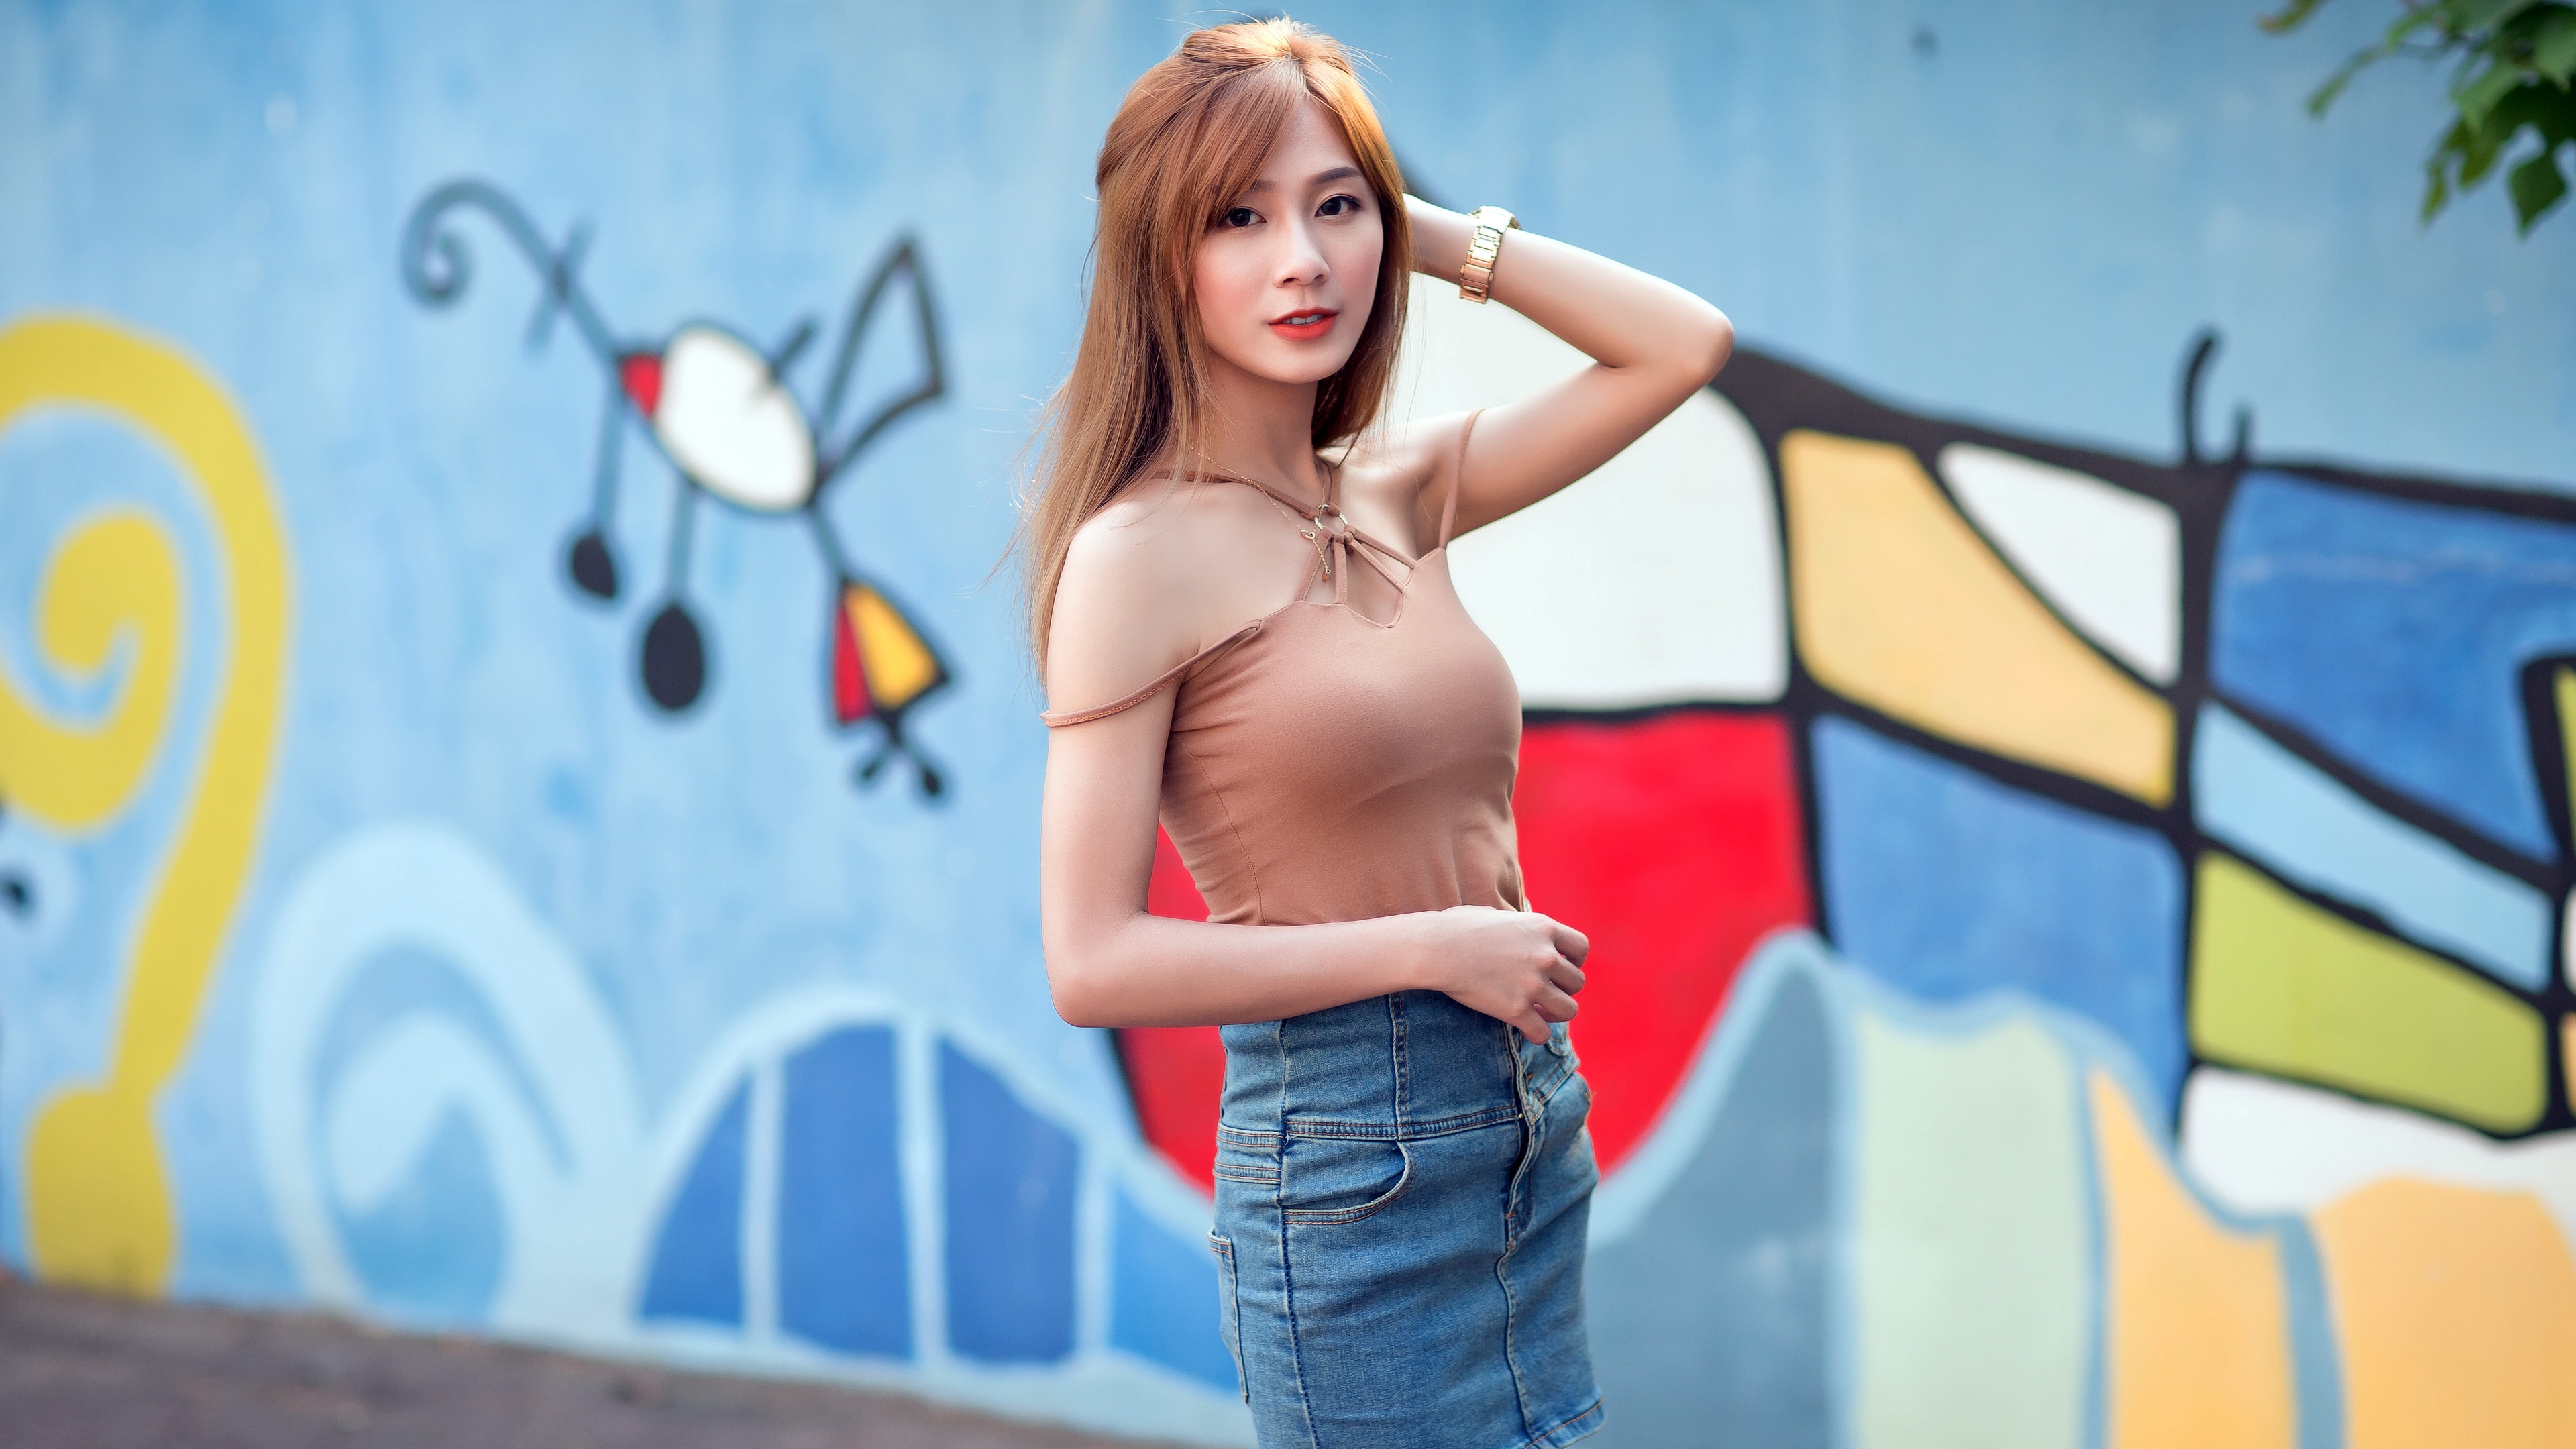 People 3840x2160 Asian model outdoors women outdoors urban wall dyed hair standing red lipstick looking at viewer Strawberry Blonde women